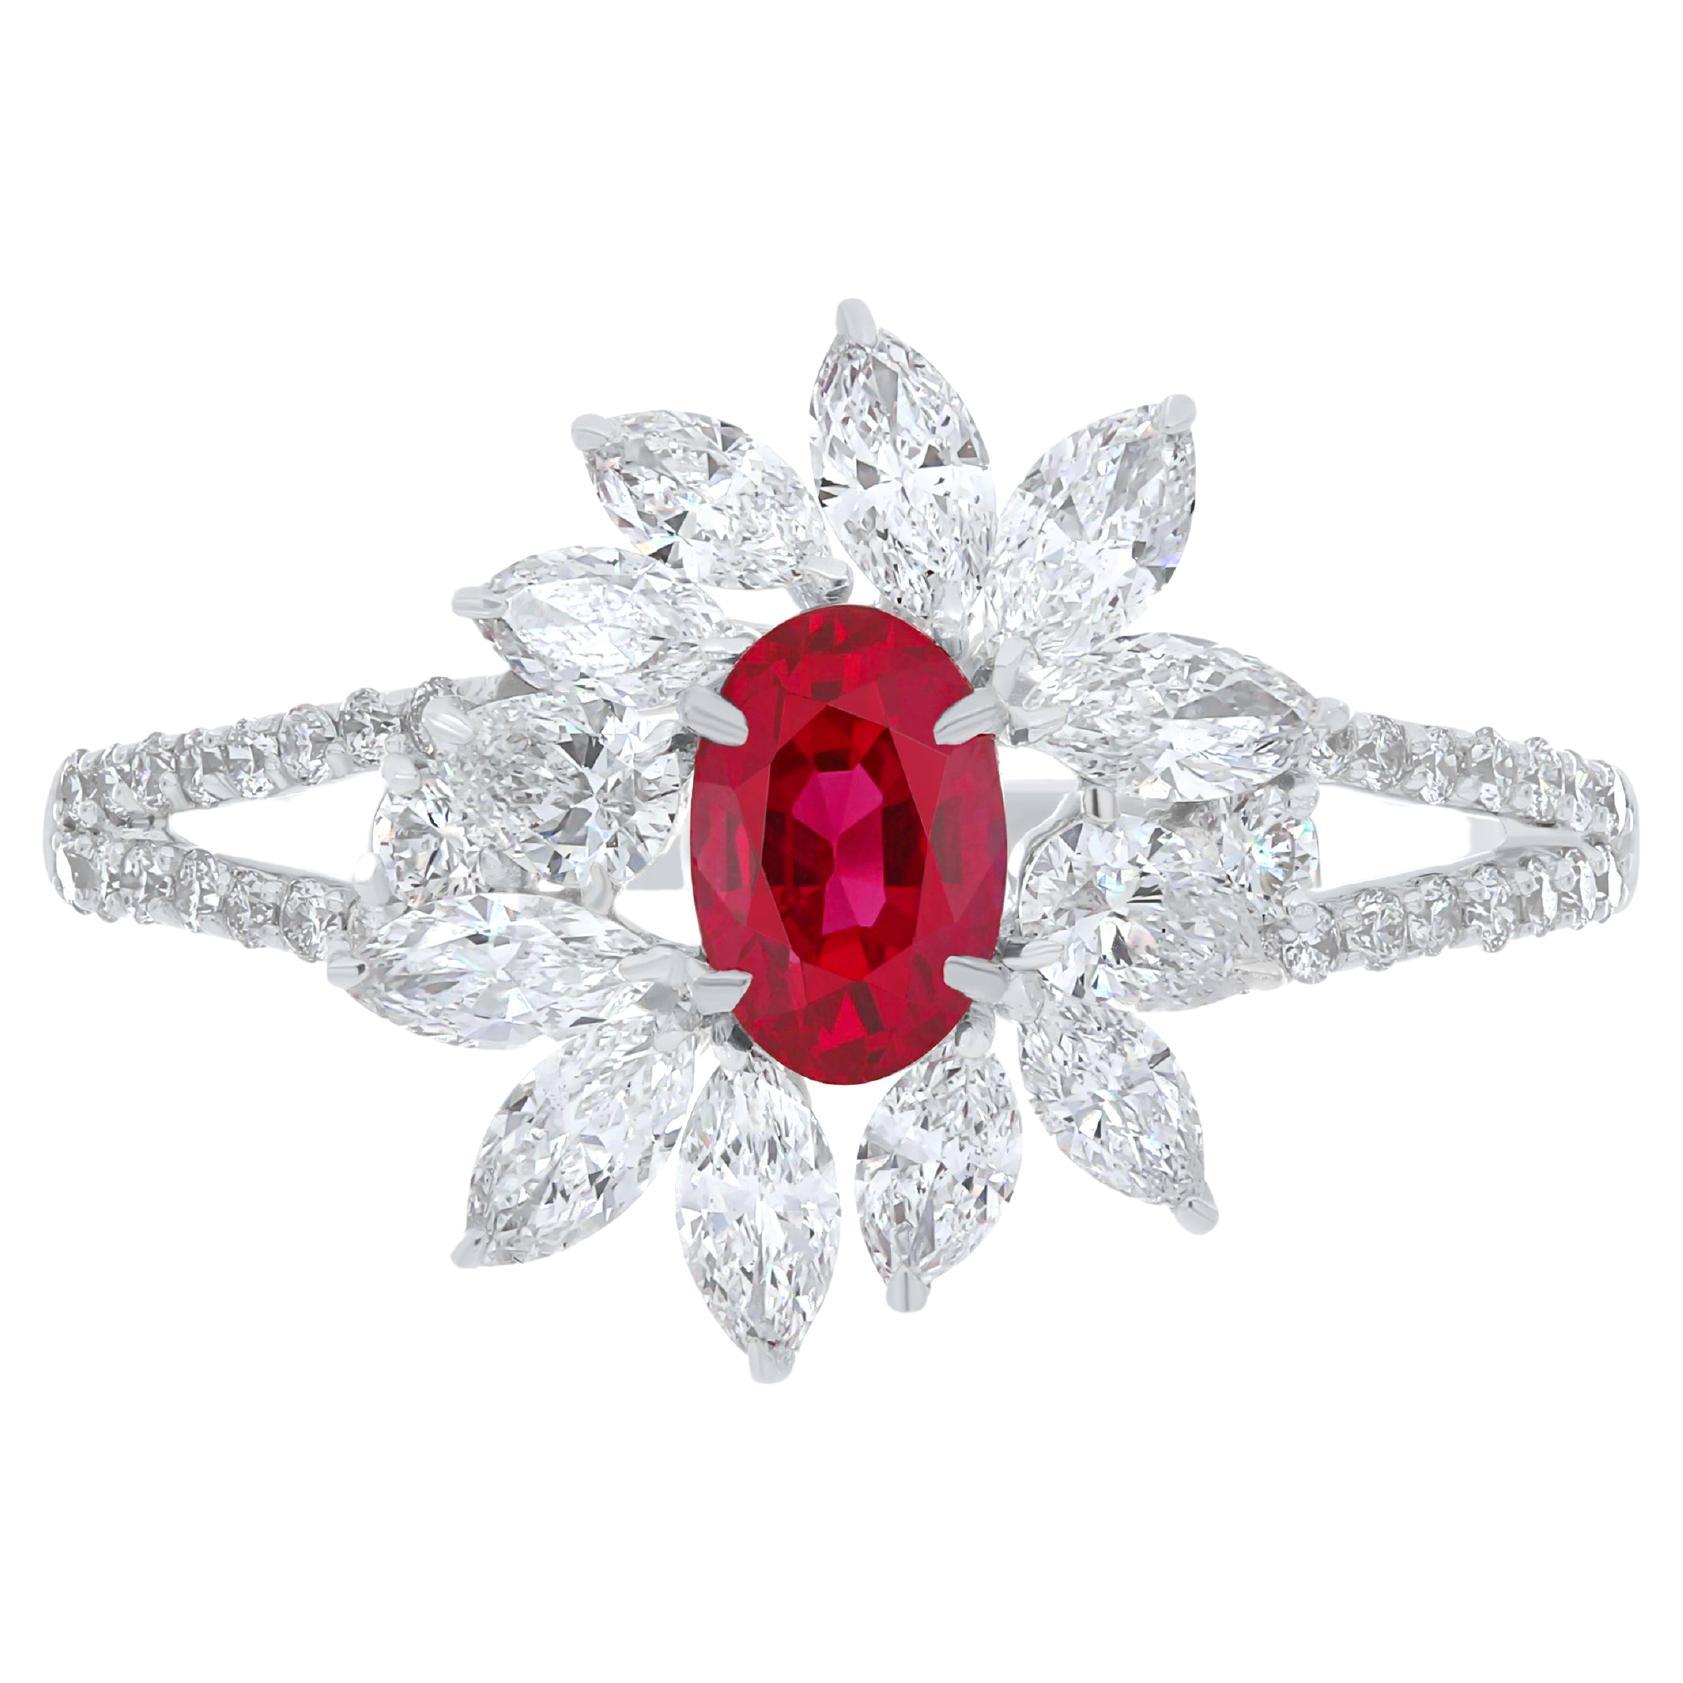 Ruby and Diamond Studded Ring in 18 Karat White Gold Handcraft Jewelry Ring